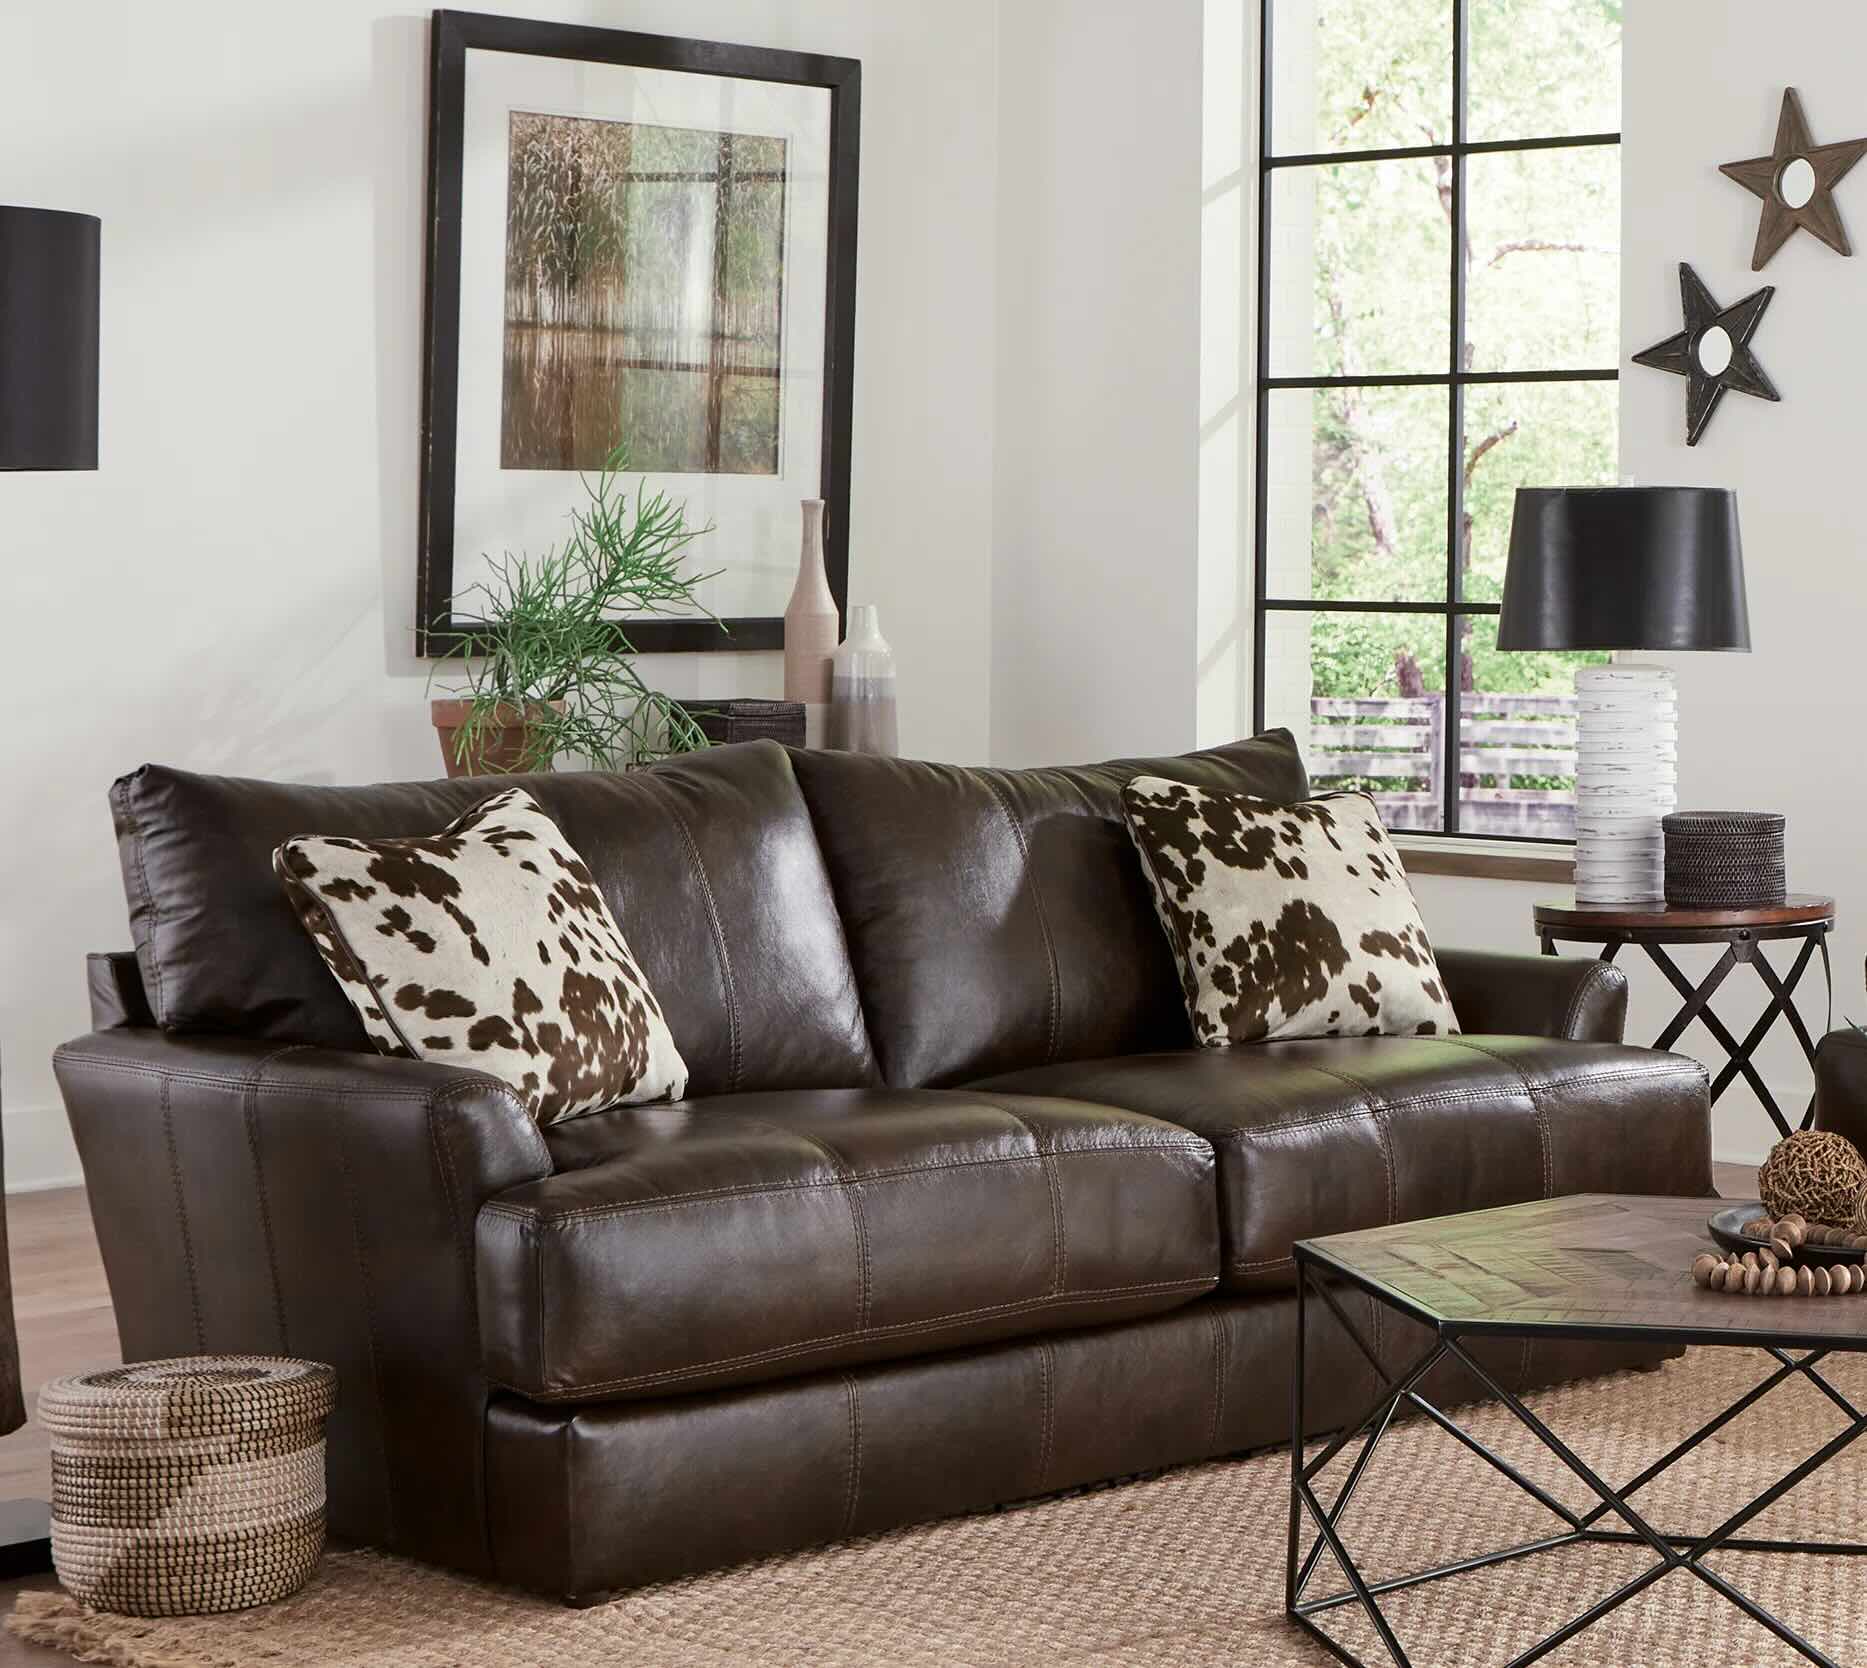 The Best Solutions To Keep Your Couch Cushions From Sliding